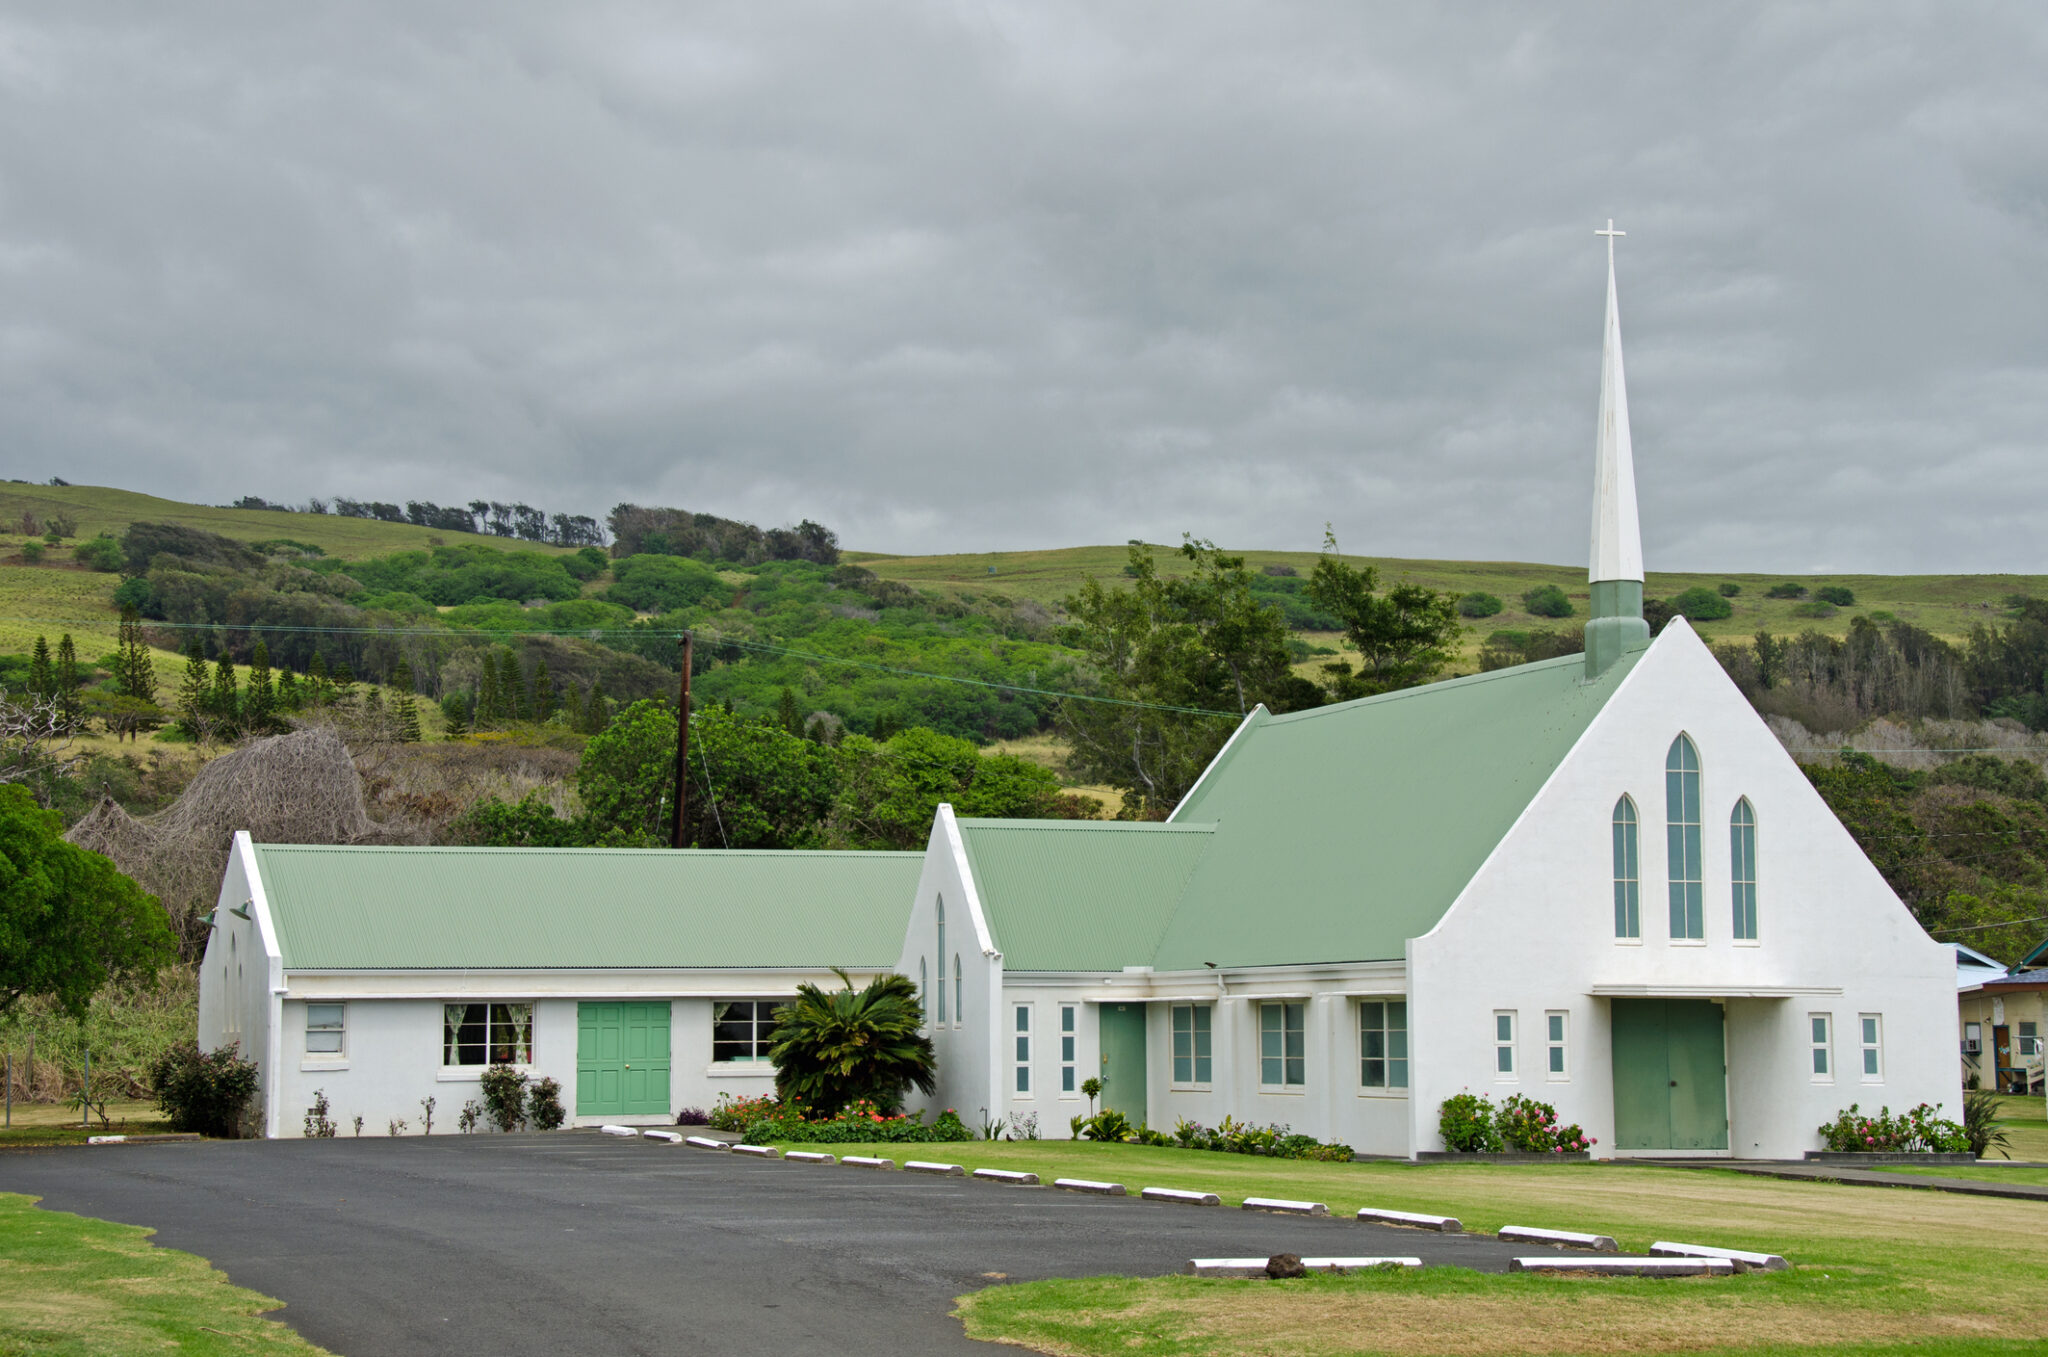 This attractive church and rural setting is in the village Naalehu, Hawaii. It is located in the southern area of the "Big Island."